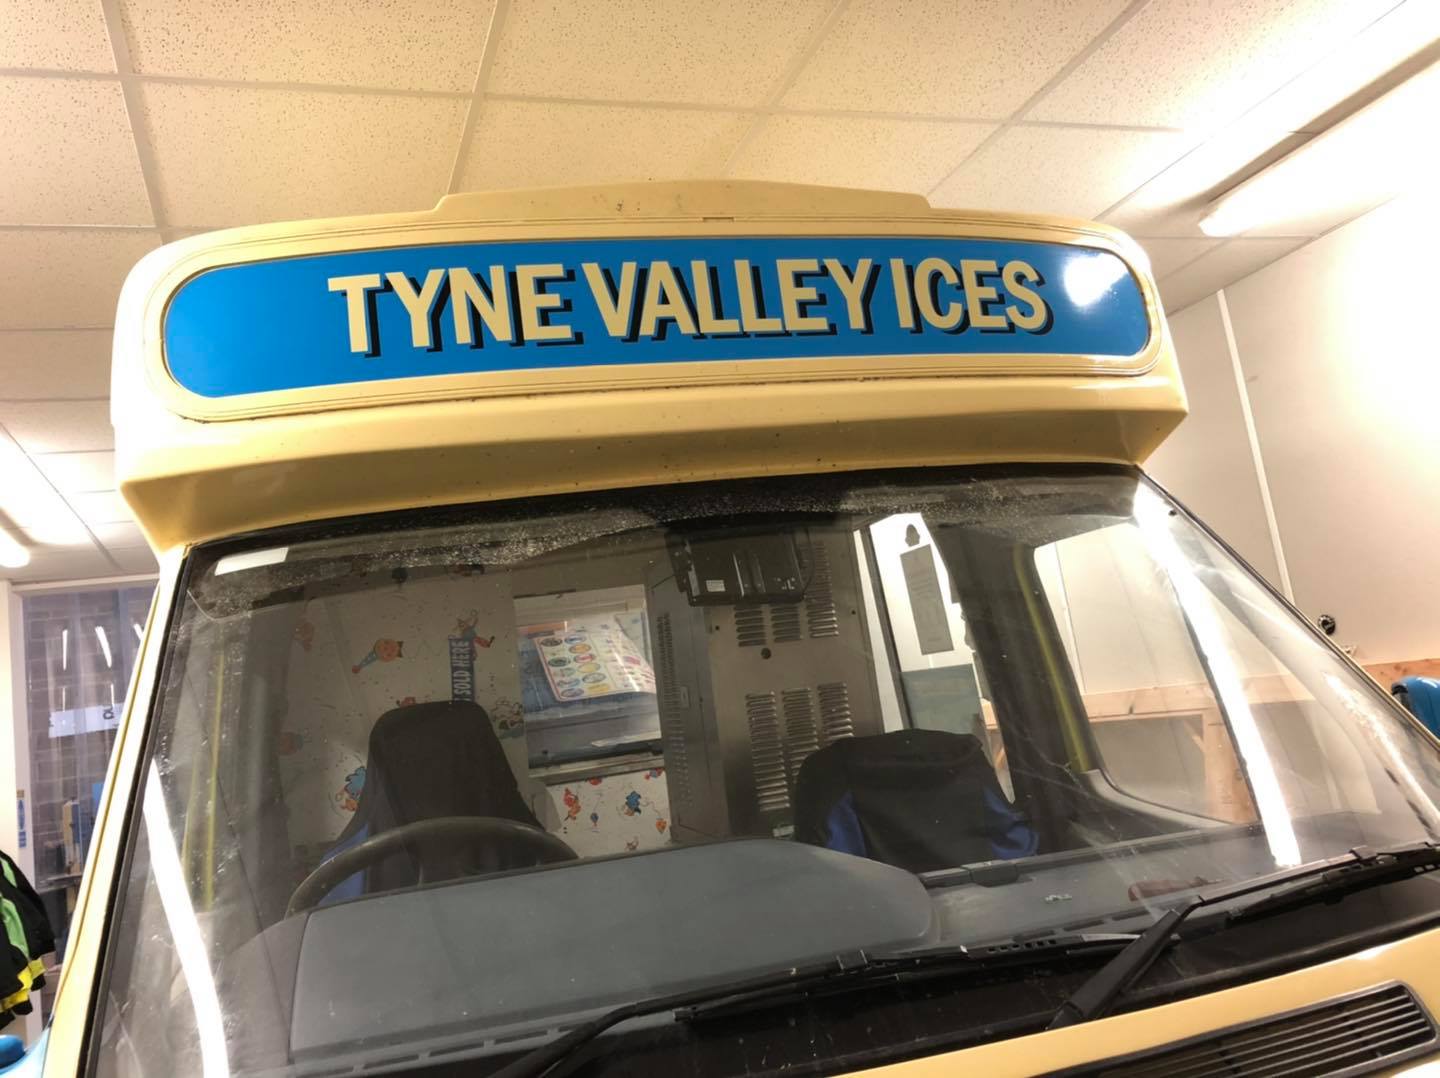 Tyne Valley Ices